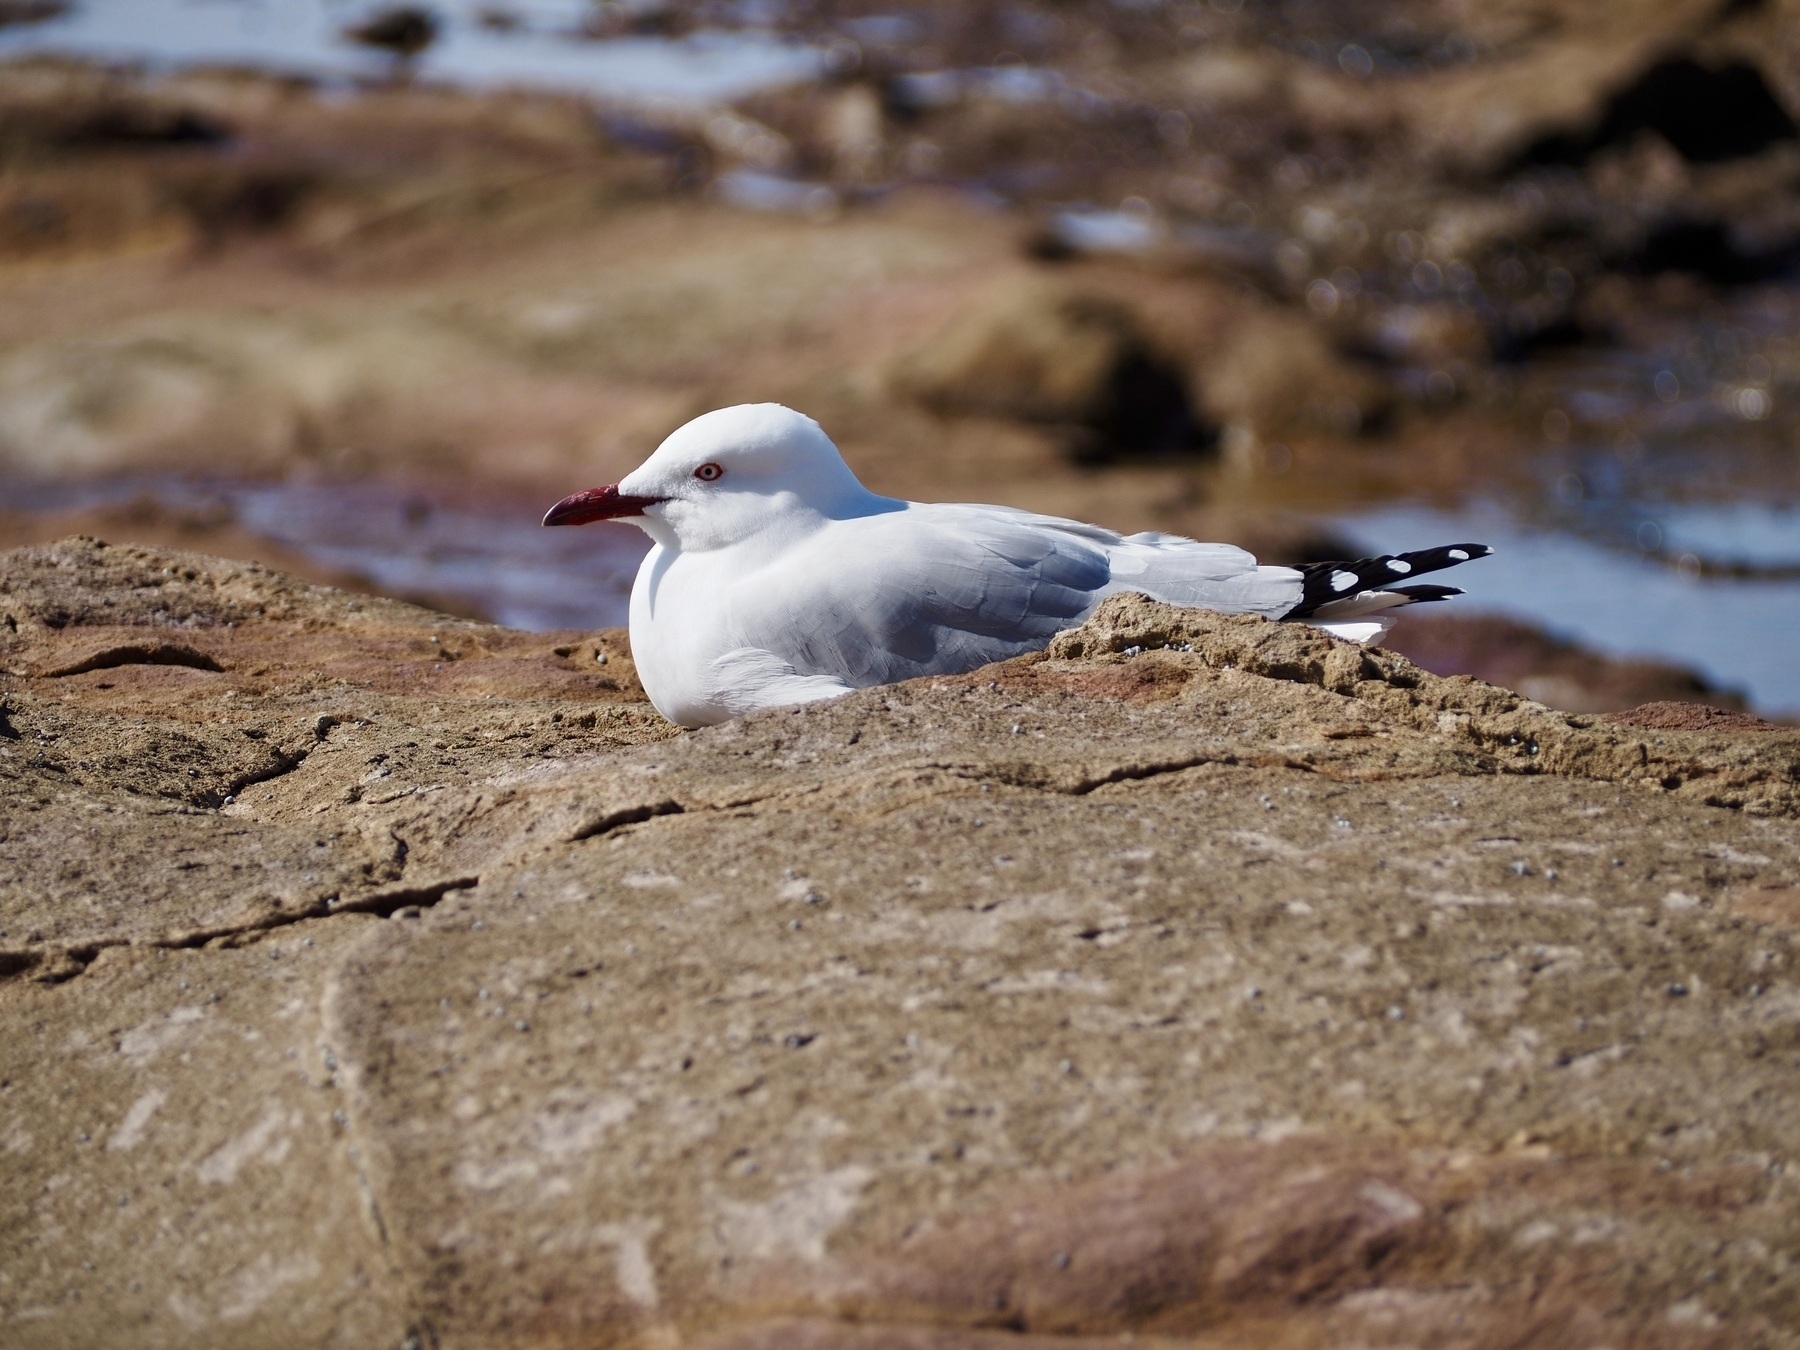 A puffy seagull relaxes next to a rock pool.